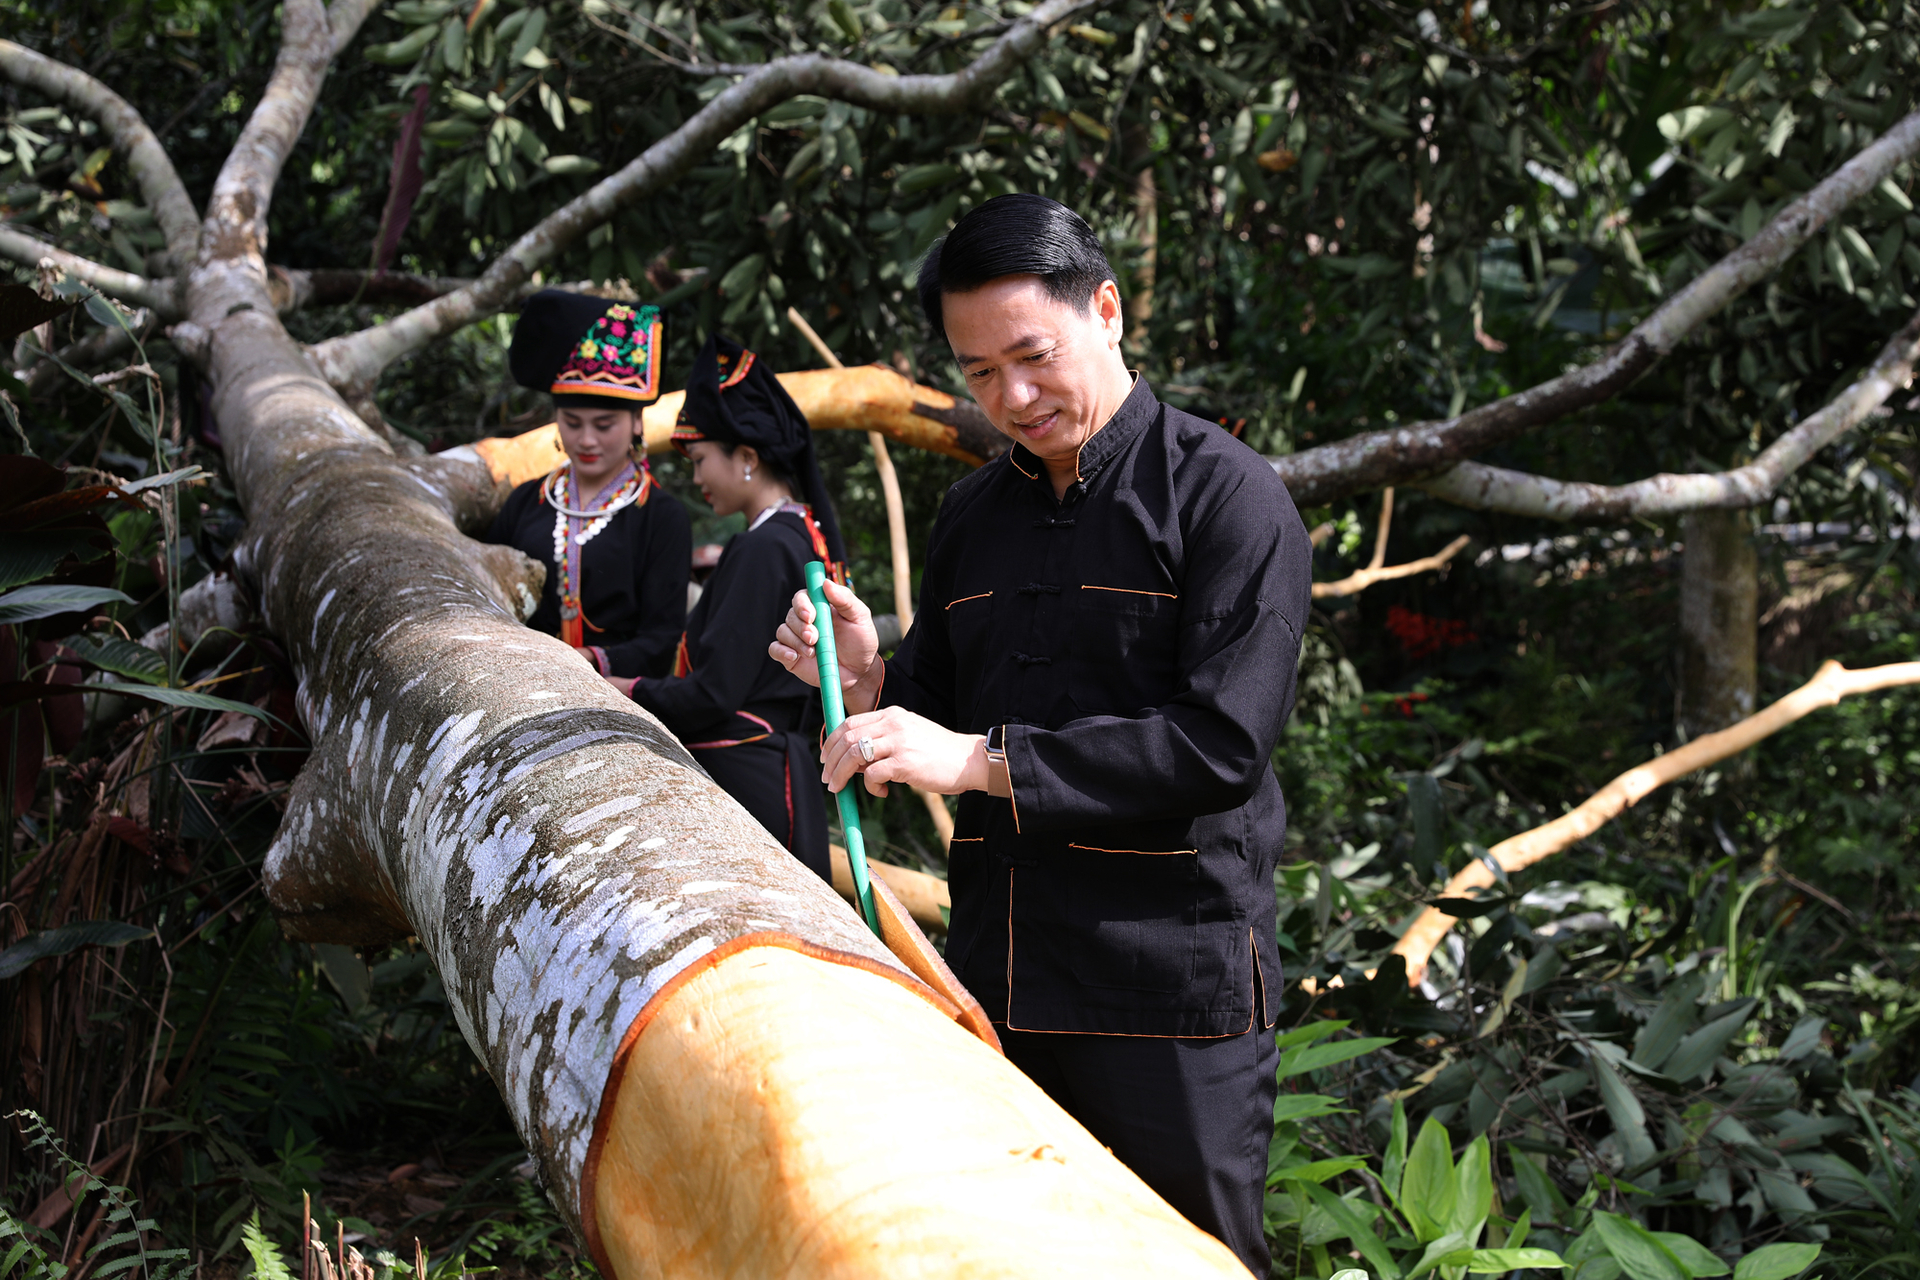 Mr. Luyen Huu Chung, the Secretary of the Van Yen District Party Committee, participated in harvesting cinnamon with the people. Photo: Thanh Mien.